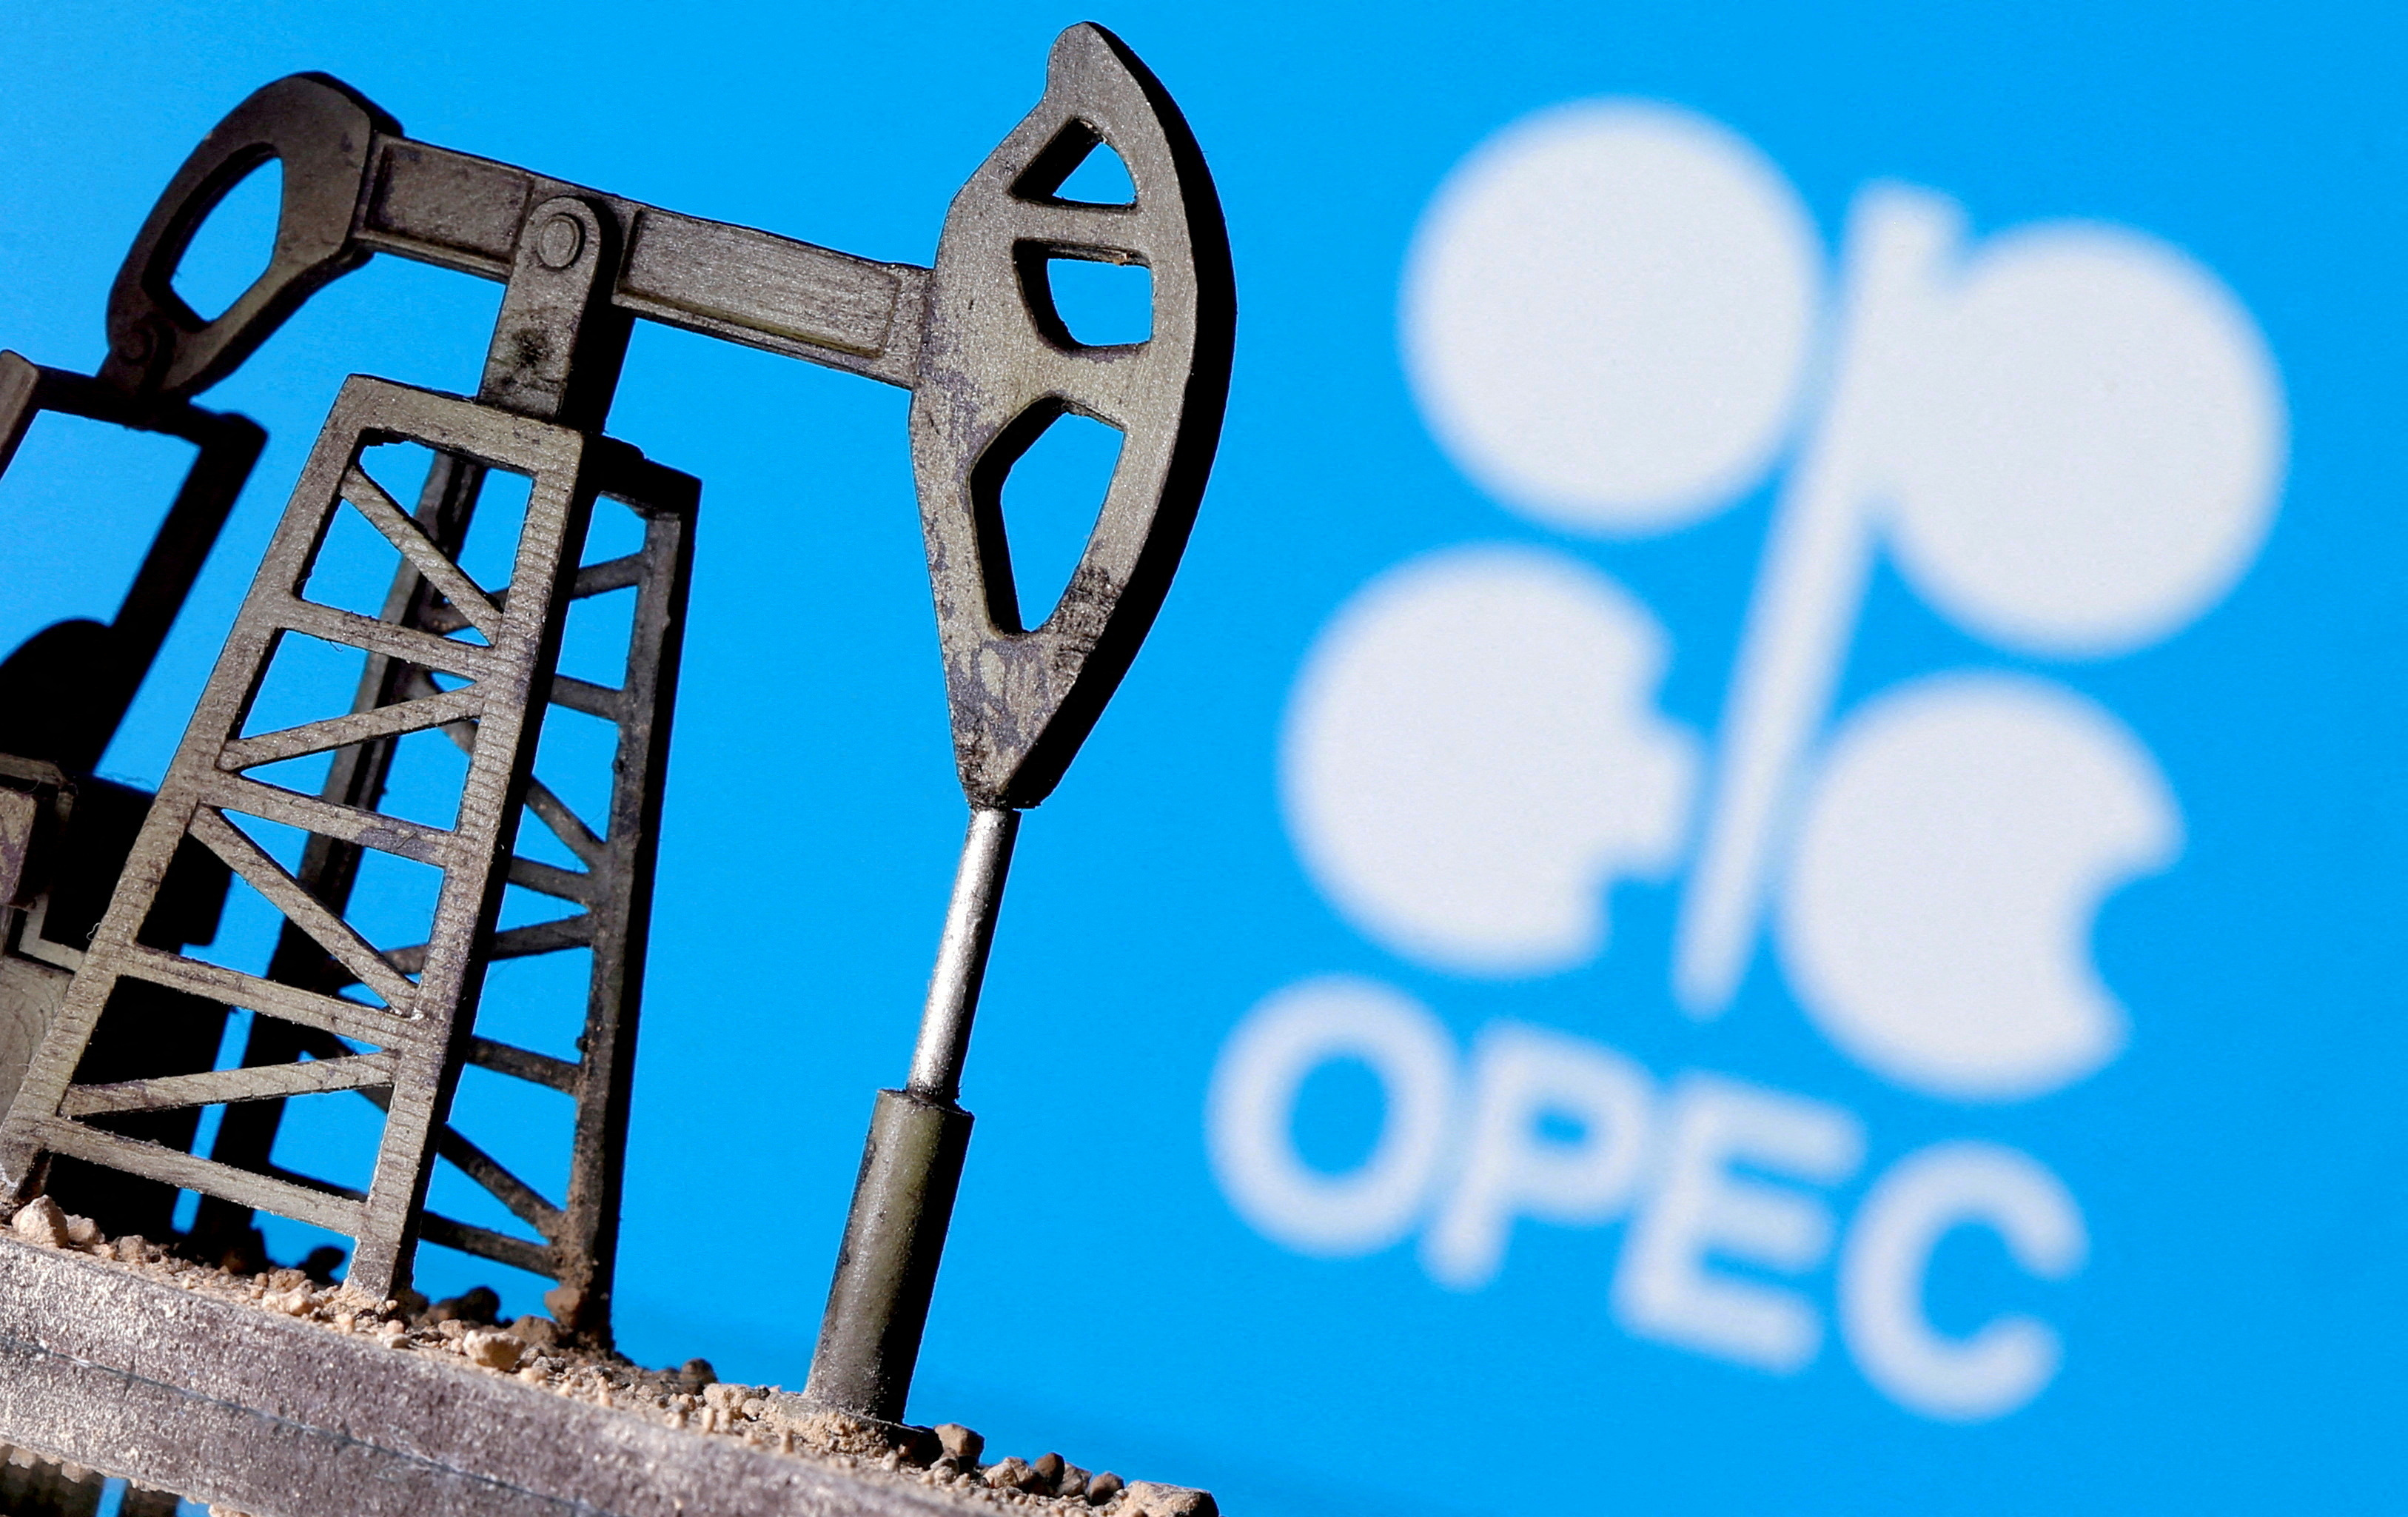 busFILE PHOTO: A 3D-printed oil pump jack in front of the OPEC logo in this illustration picture